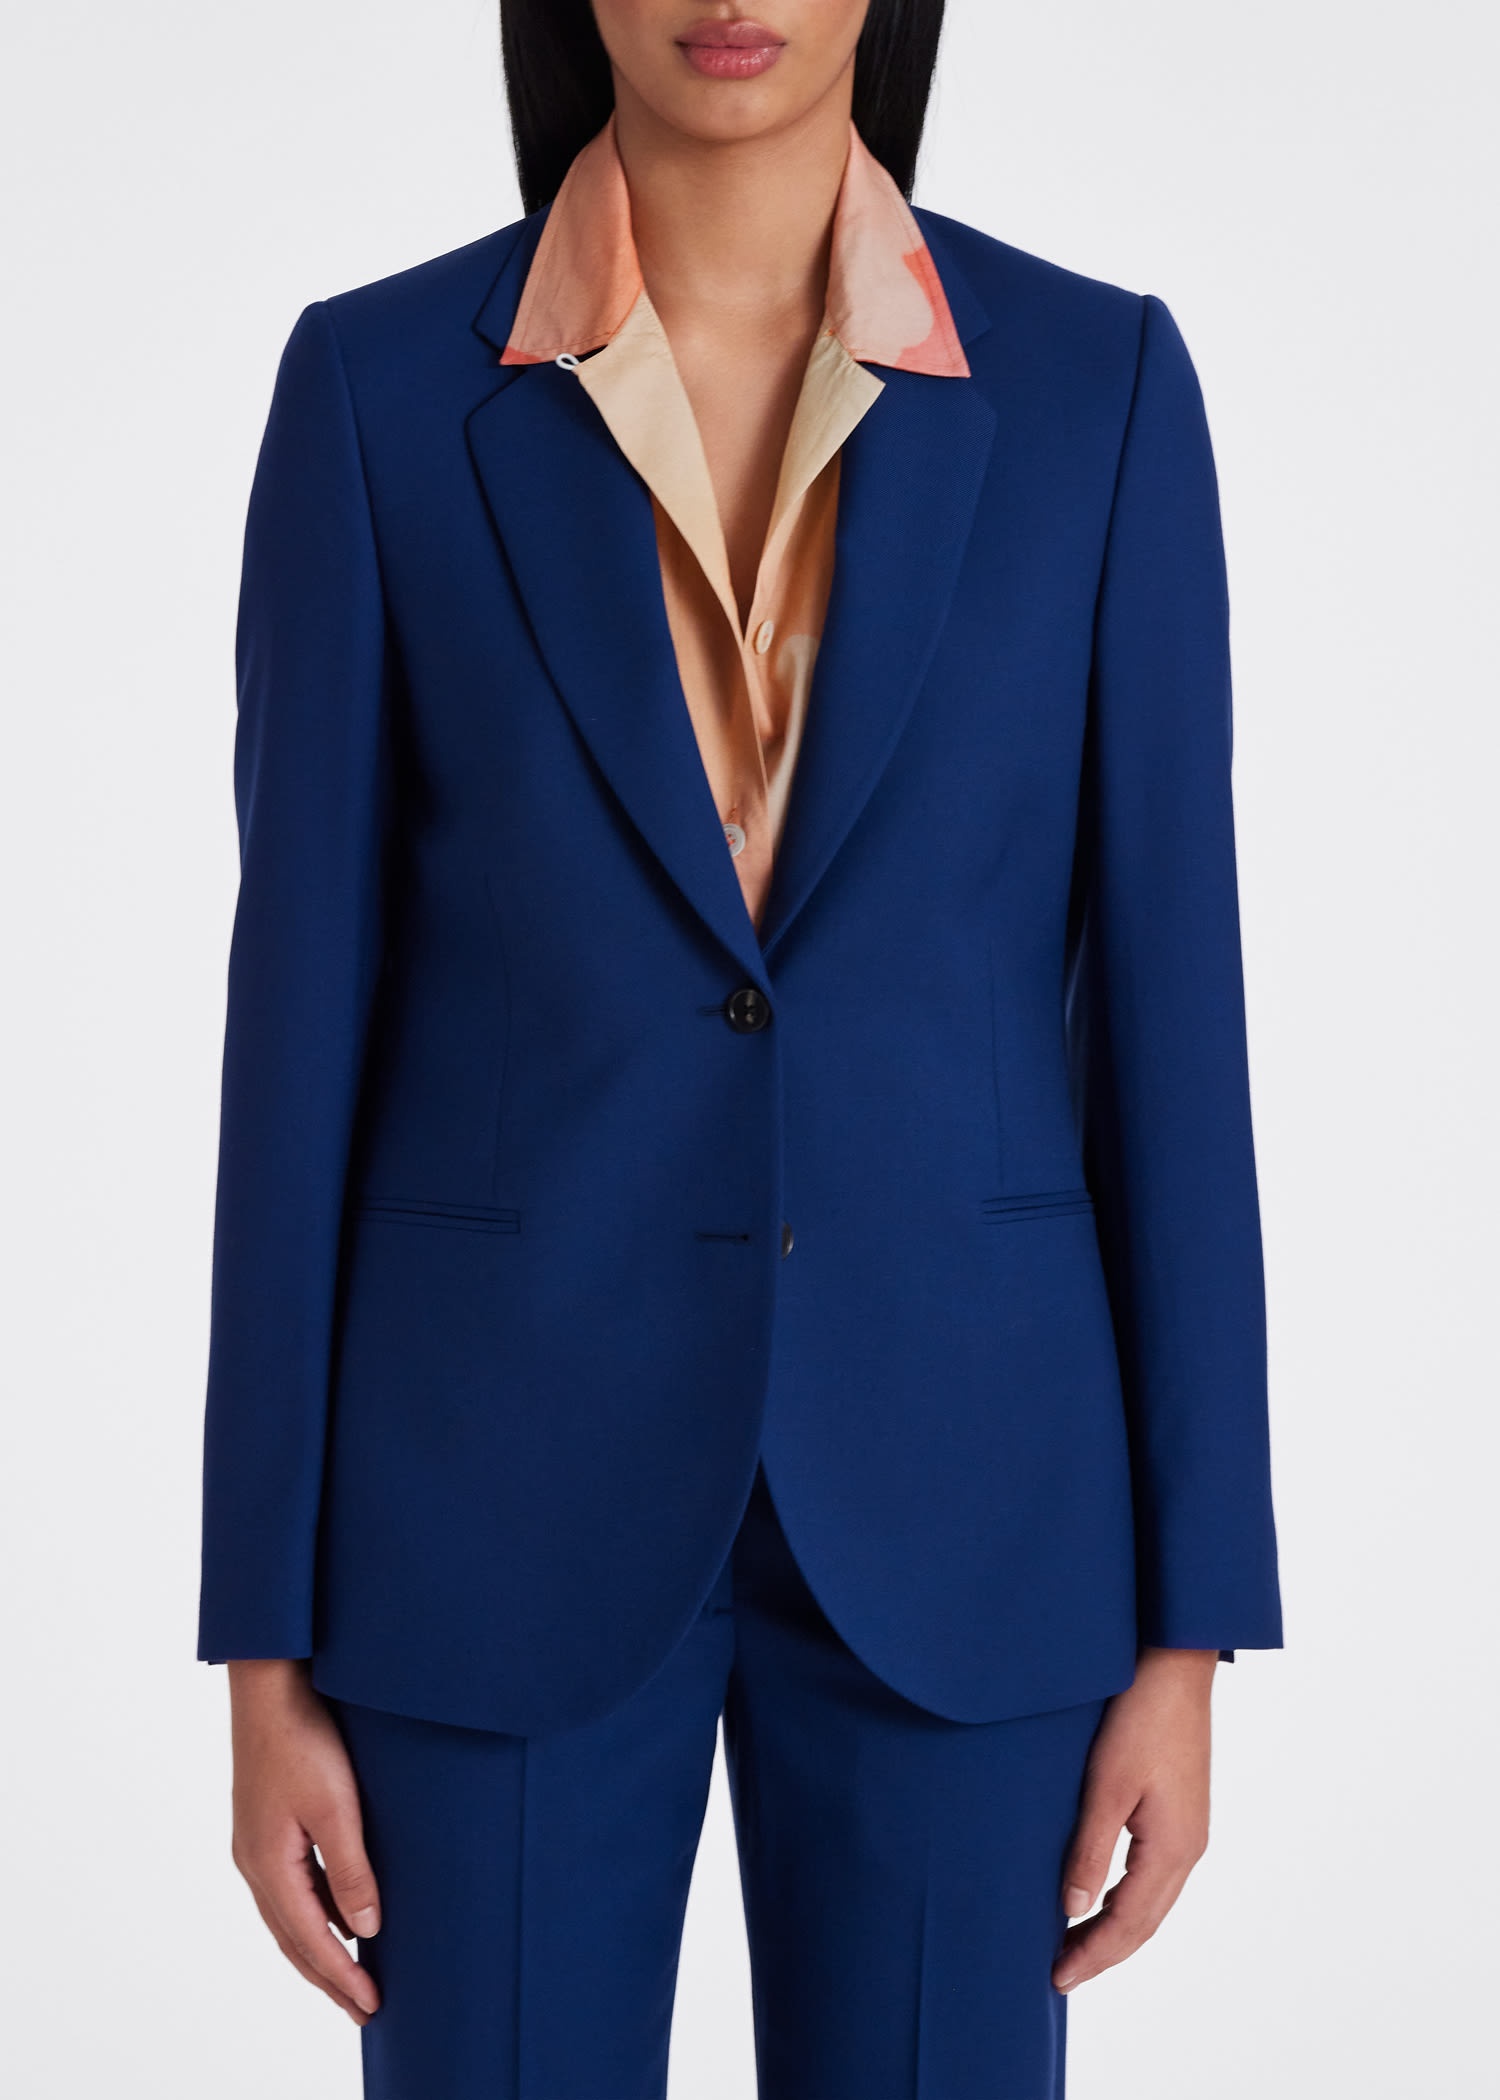 A Suit To Travel In - Women's Wool Suit - 7